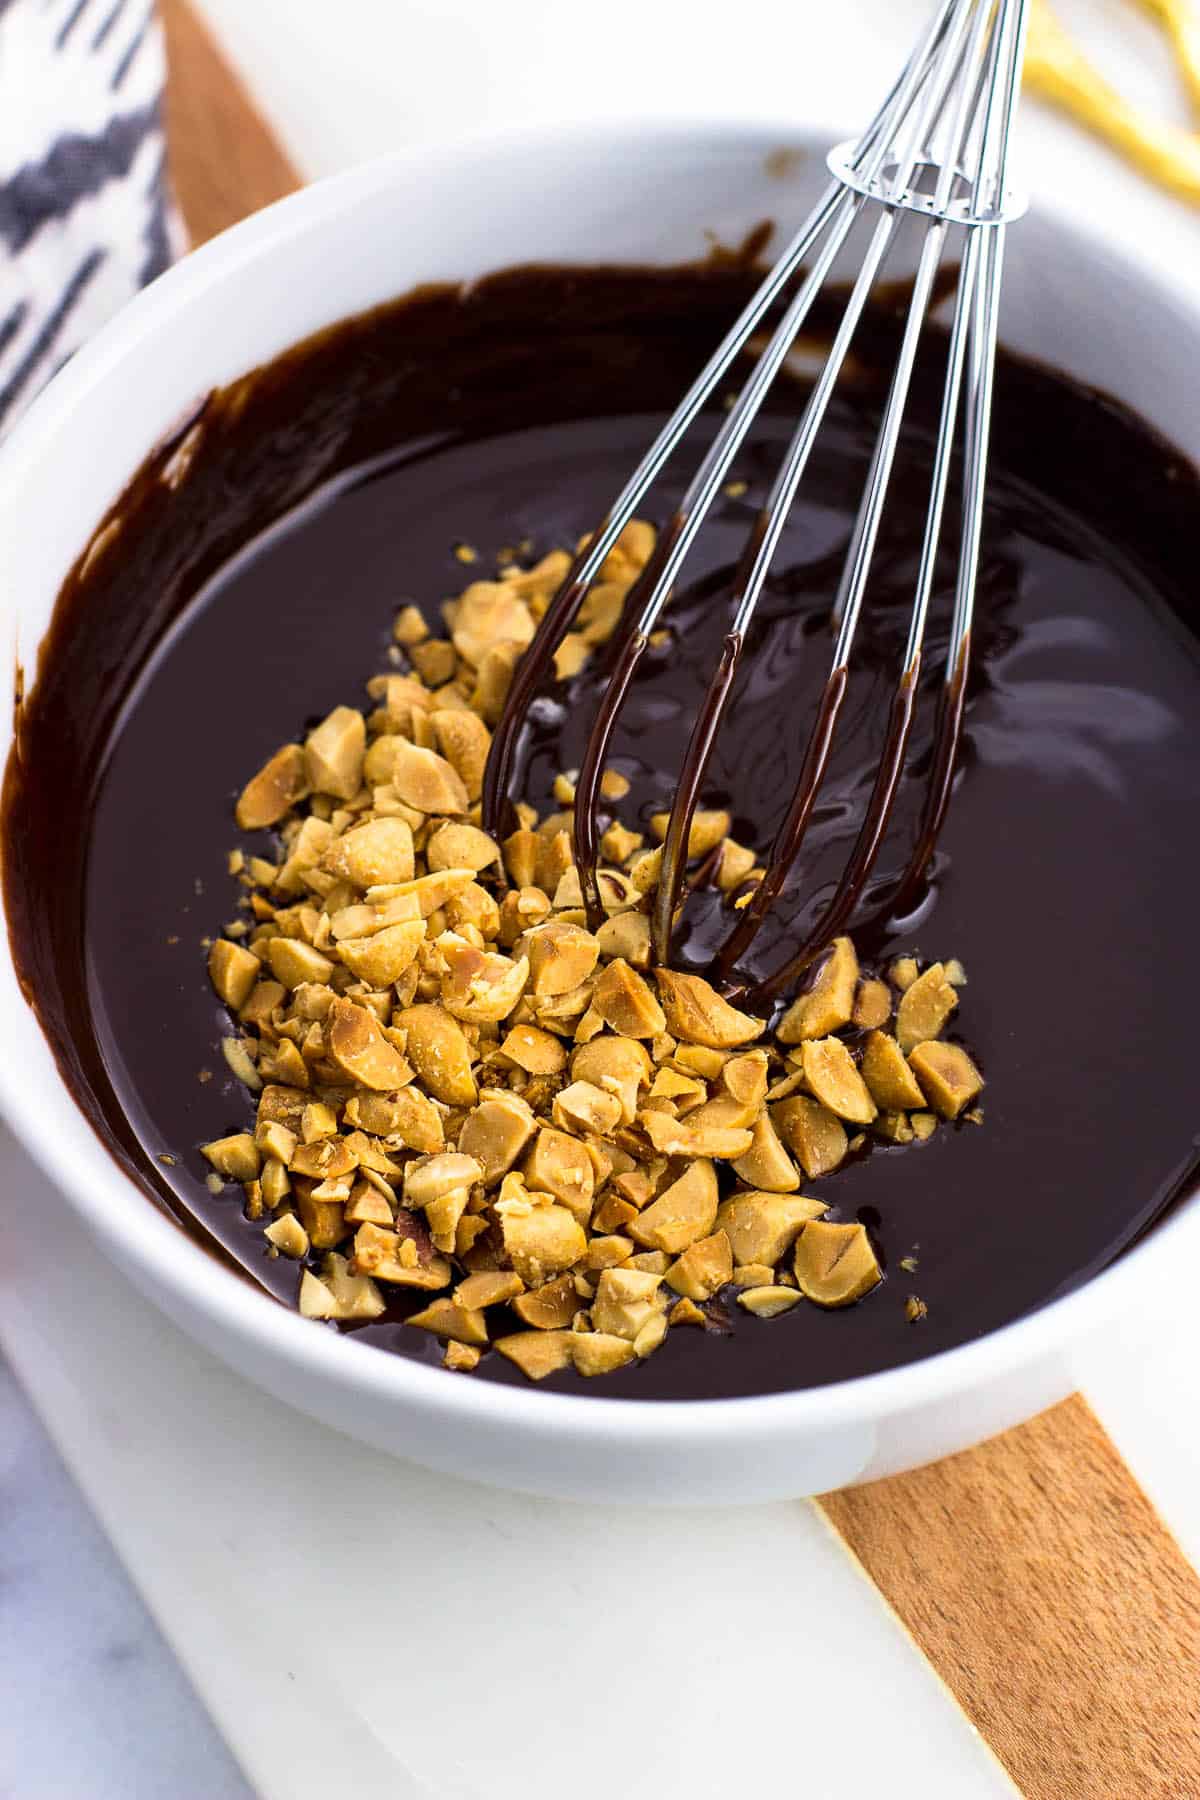 The melted chocolate/butter/cream/peanut butter mixture in a bowl with chopped peanuts on top and a whisk